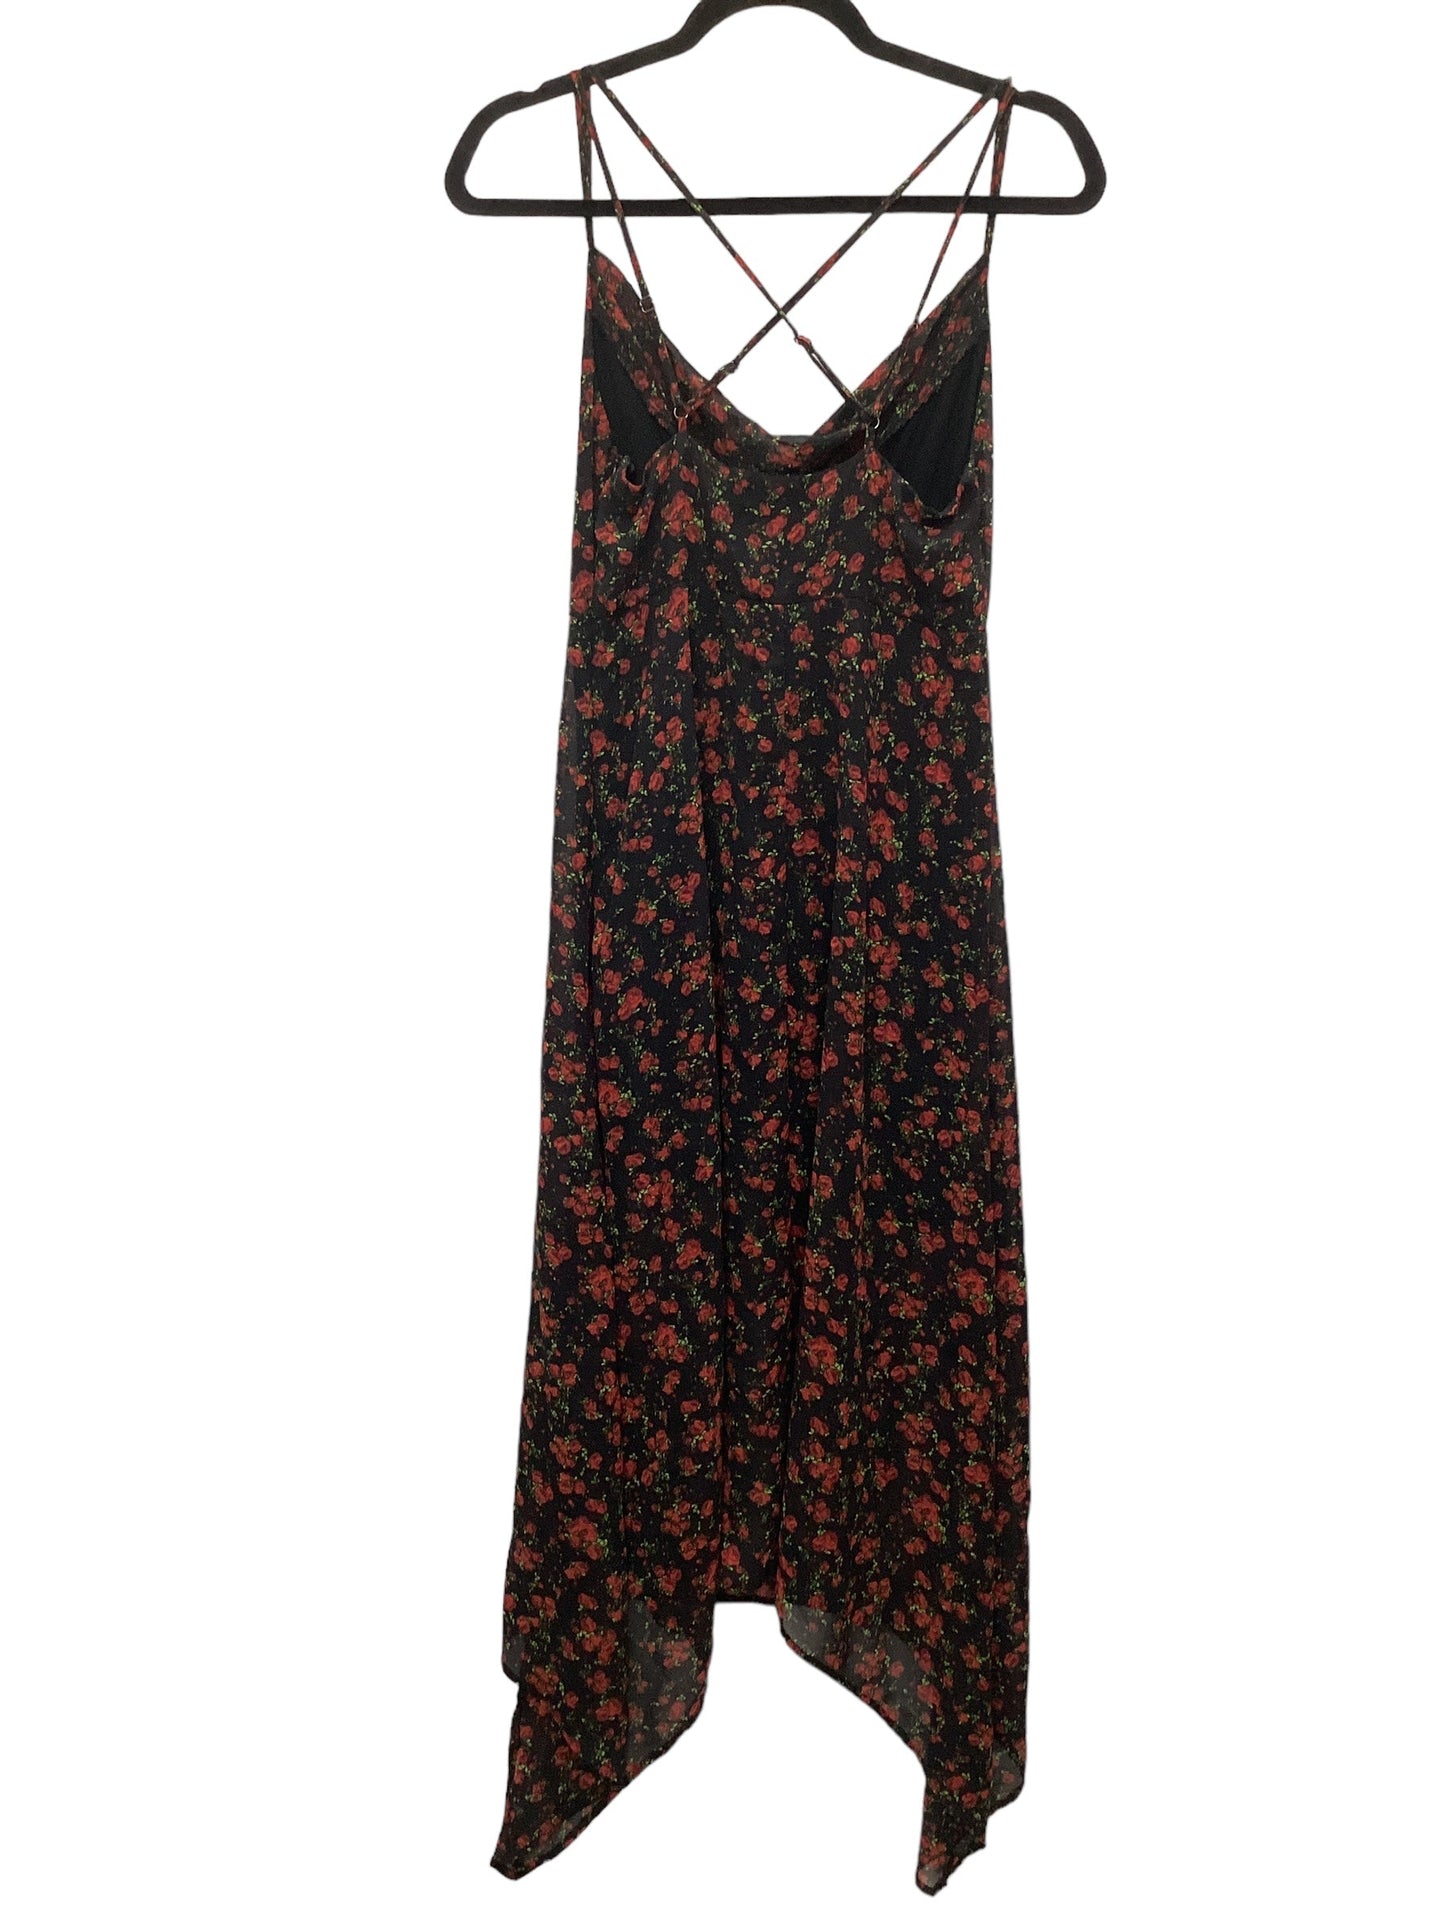 Black & Red Dress Casual Midi Wild Fable, Size Xs